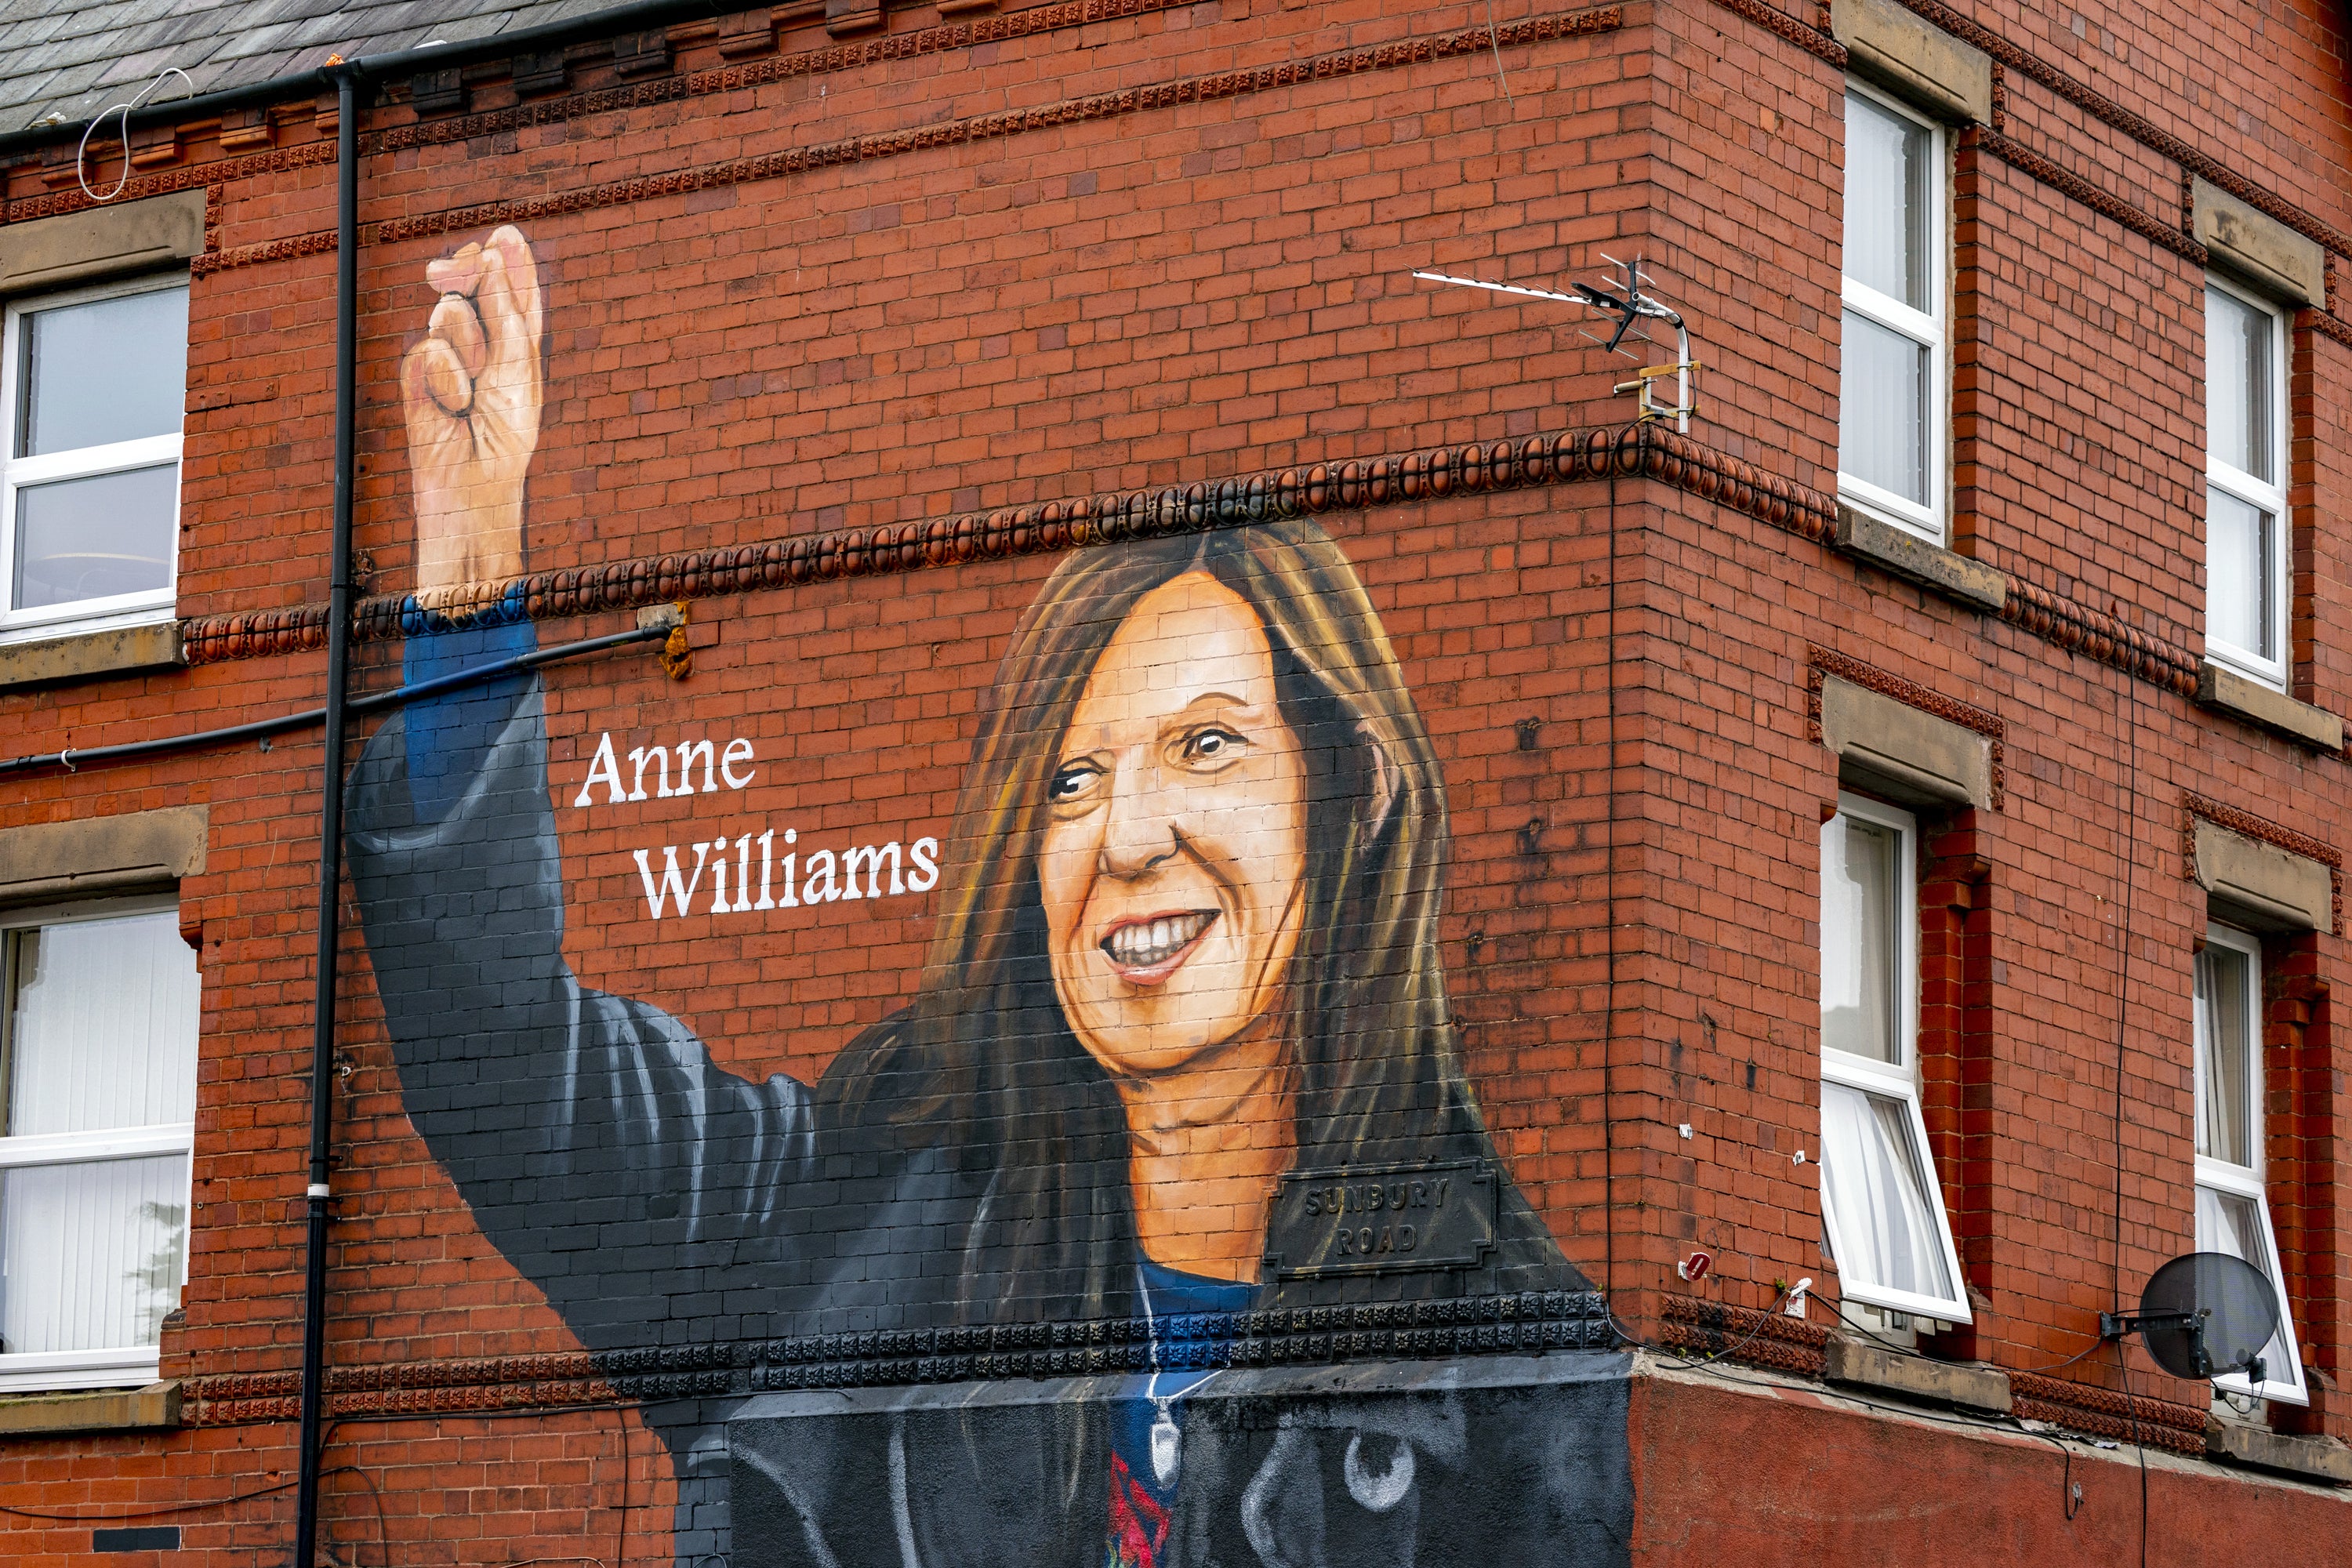 With hope in your heart: a mural of Anne Williams, the mother of Hillsborough victim Kevin Williams, in the Anfield area of Liverpool